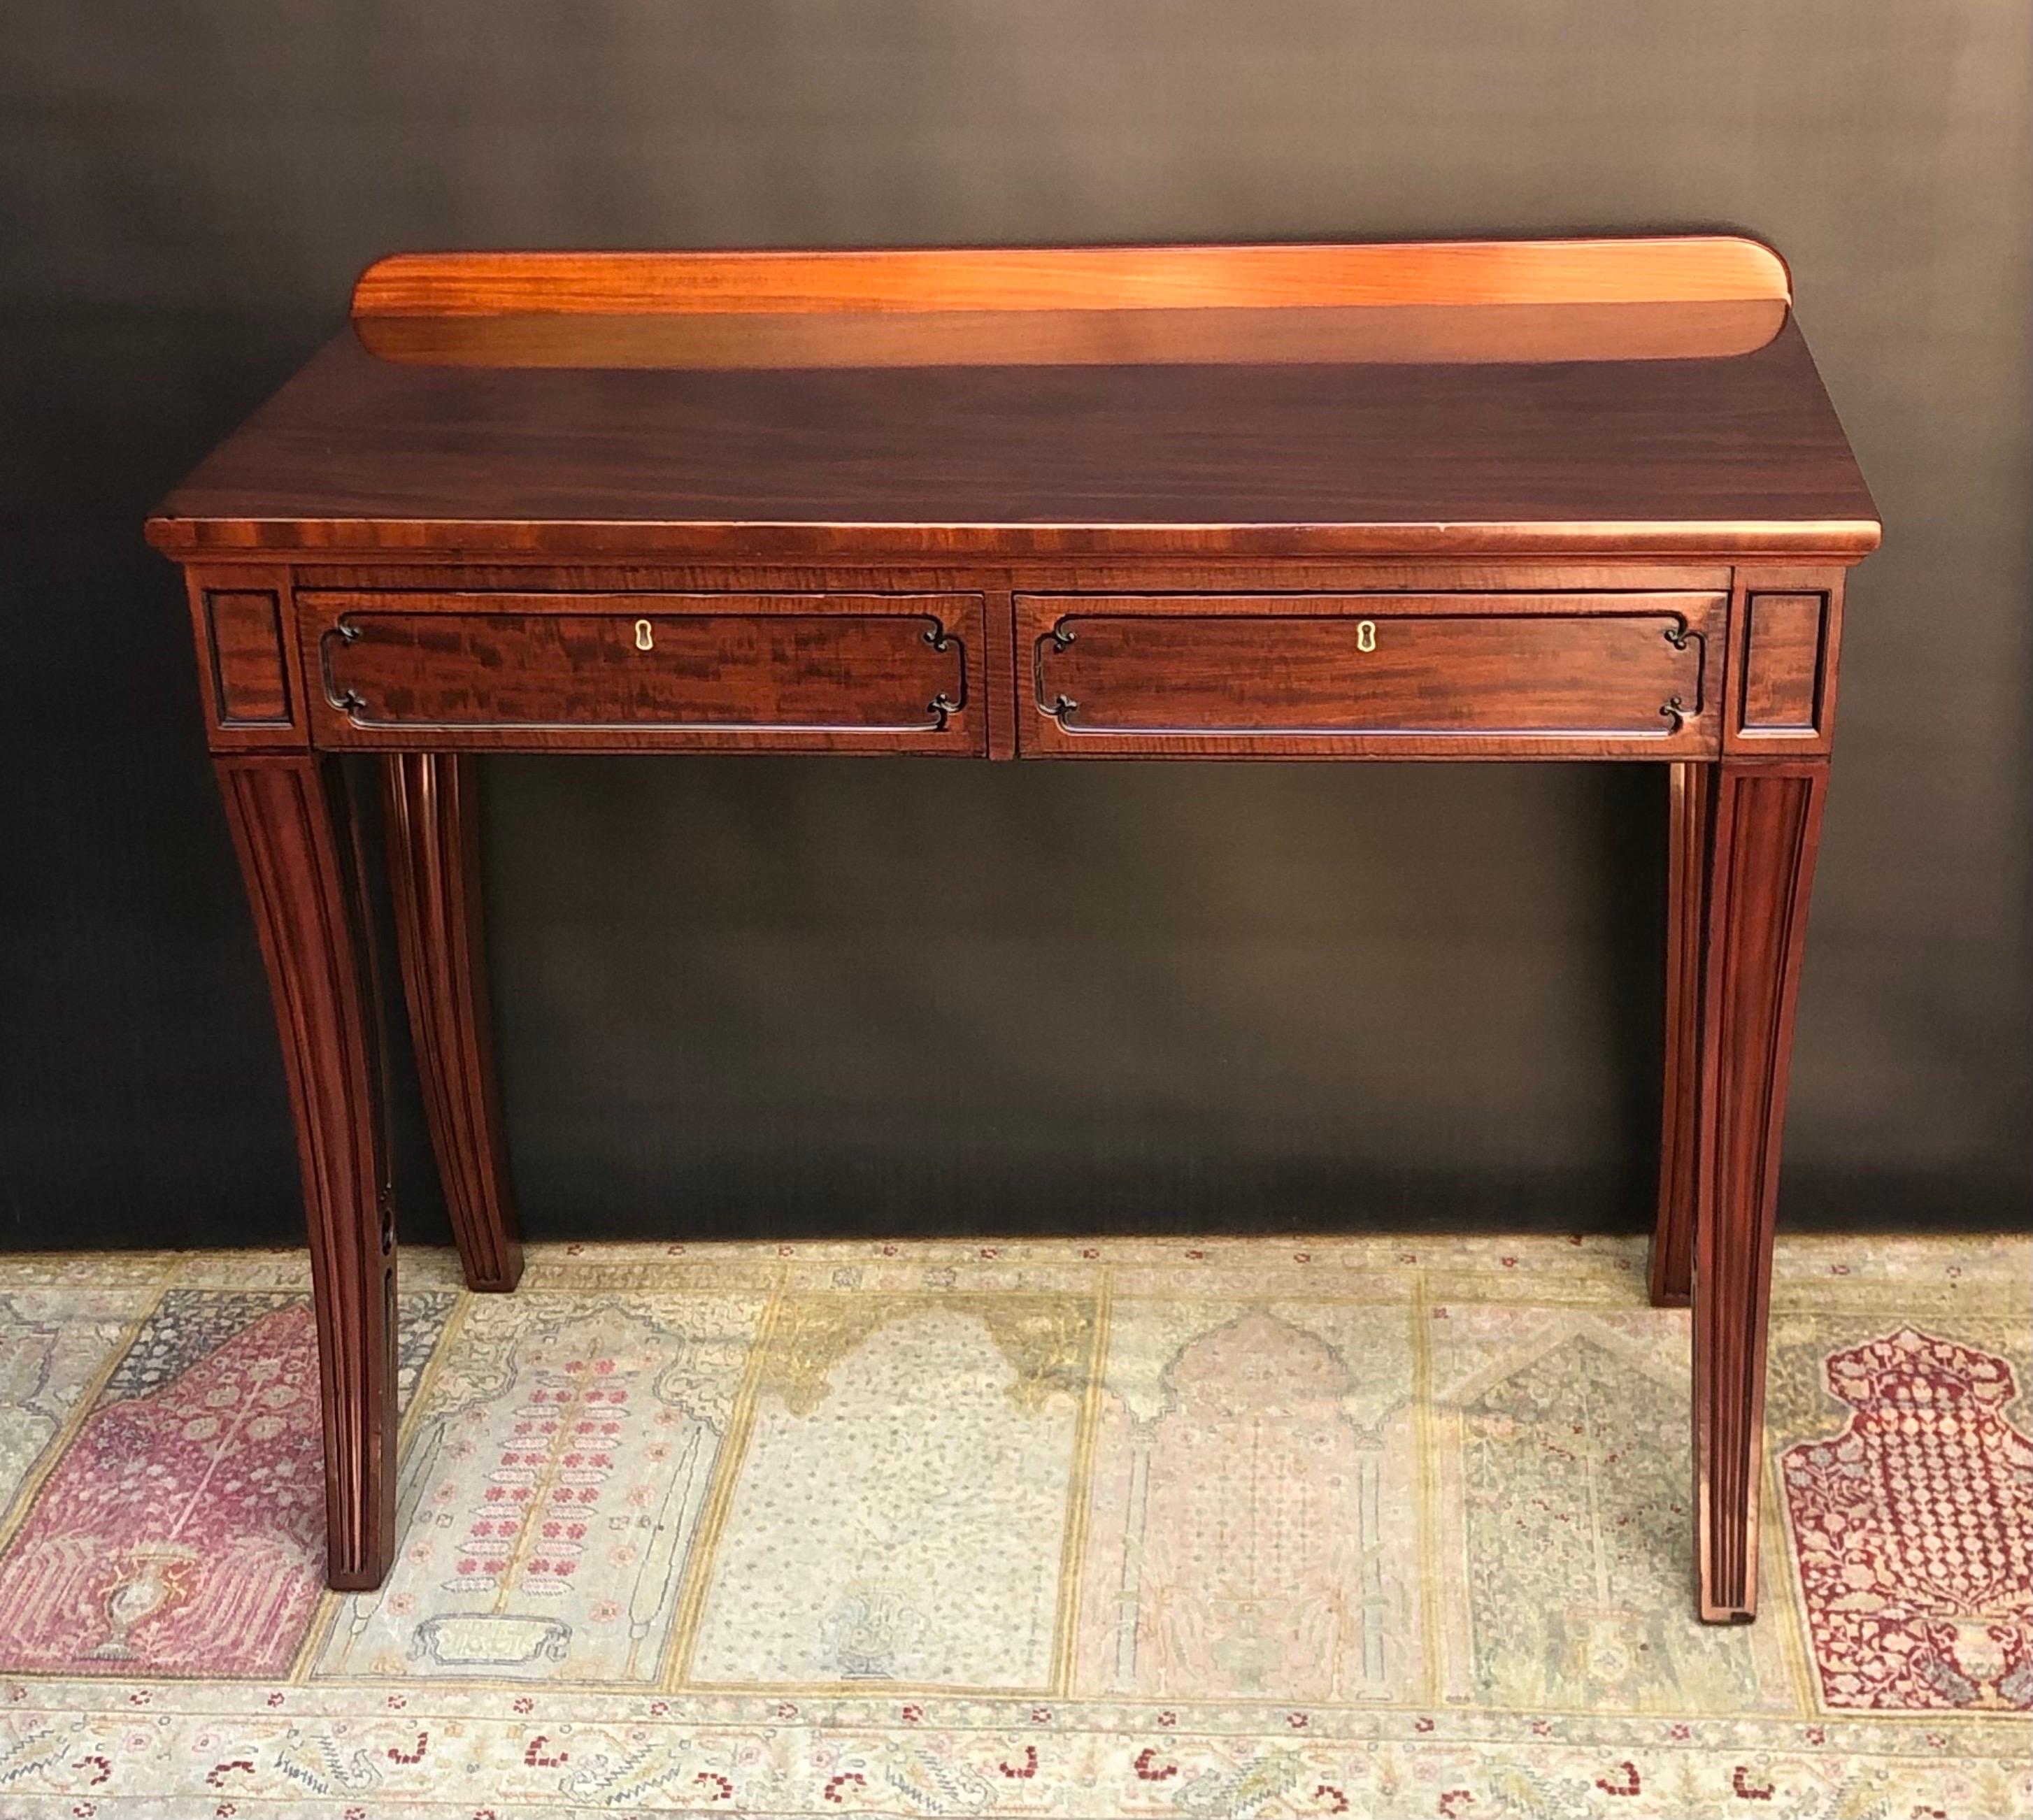 This Sophisticated English Regency Saber Leg Mahogany, Ebony & Ebonized Seddon Sideboard / Console Table was made in the early Nineteenth Century in England. The Regency Saber Leg Sideboard has a beautiful figured veneered mahogany top with a